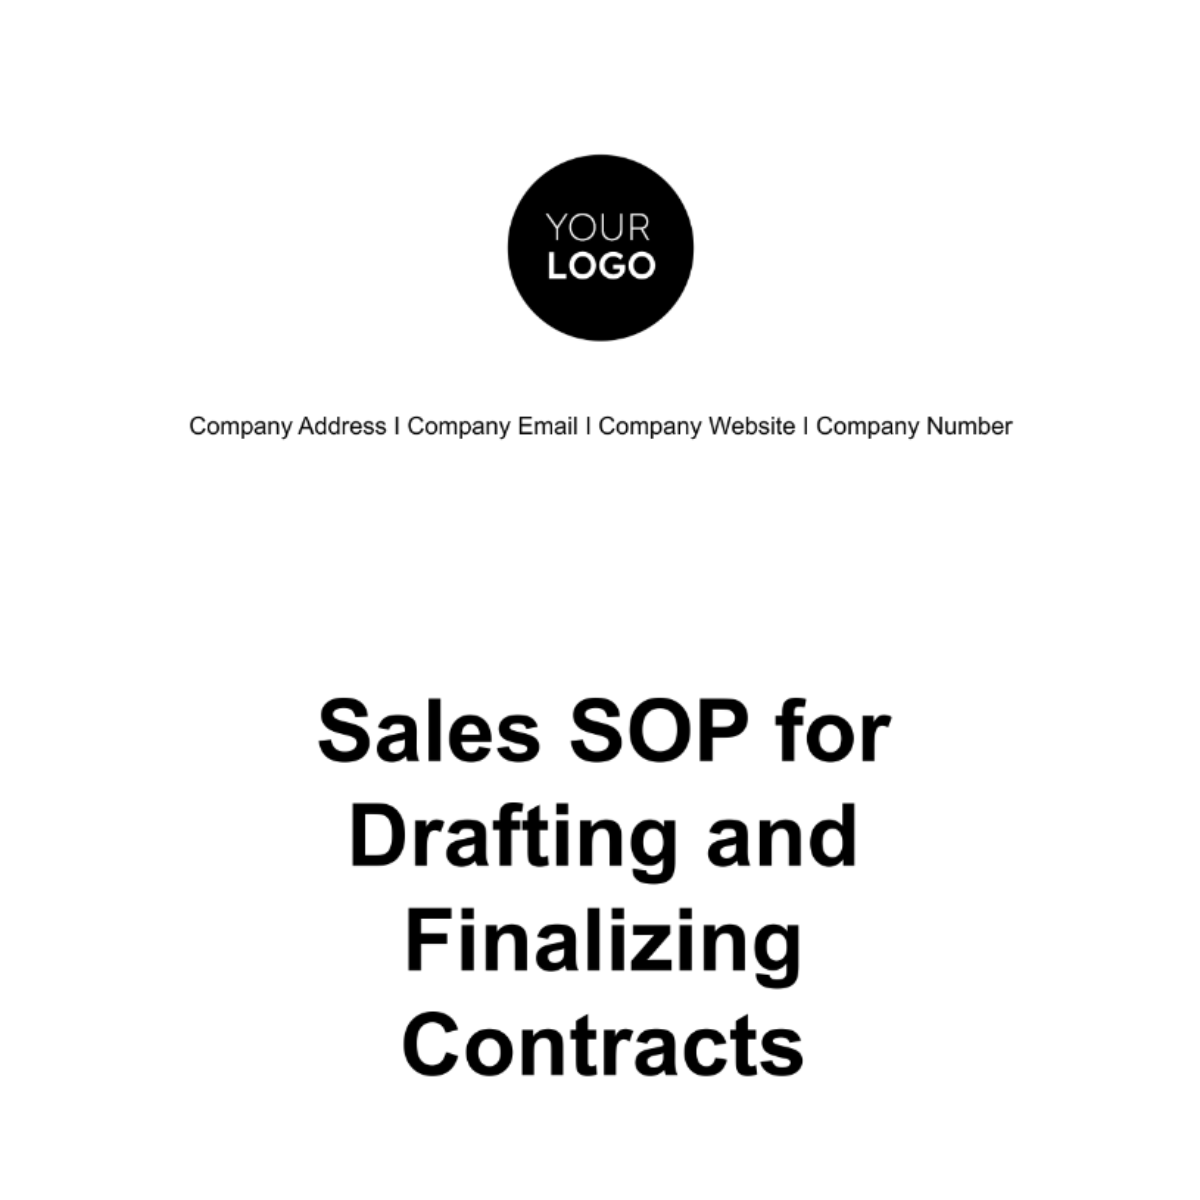 Sales SOP for Drafting and Finalizing Contracts Template